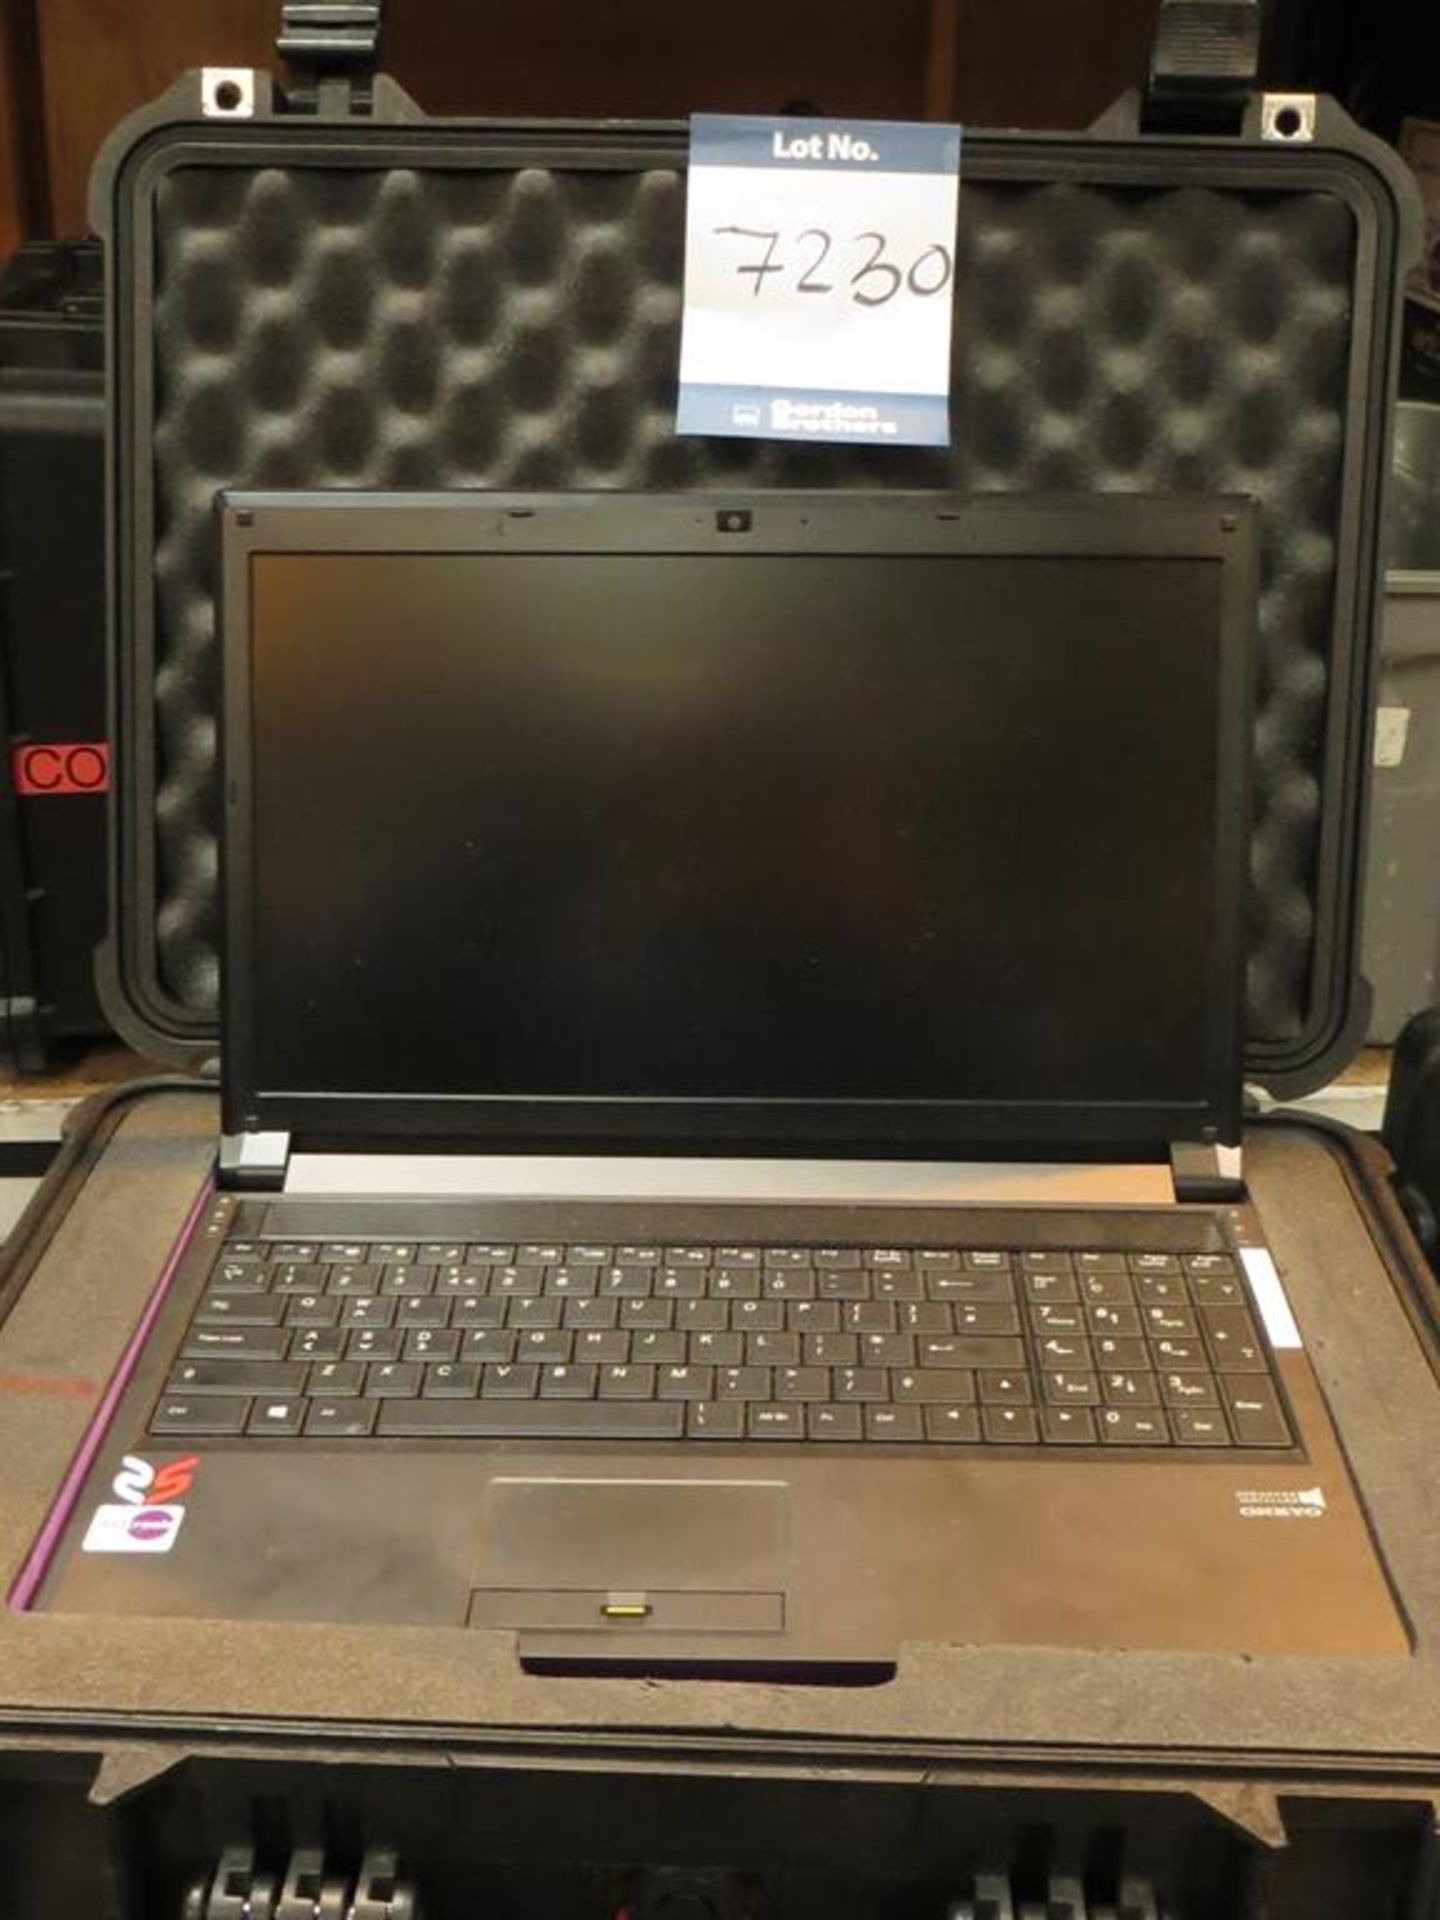 Workstation Specialists, Model P150SM laptop, 15" i7, 2.5GHz, 16gb RAM, 180 GB HD in transit case: - Image 2 of 3